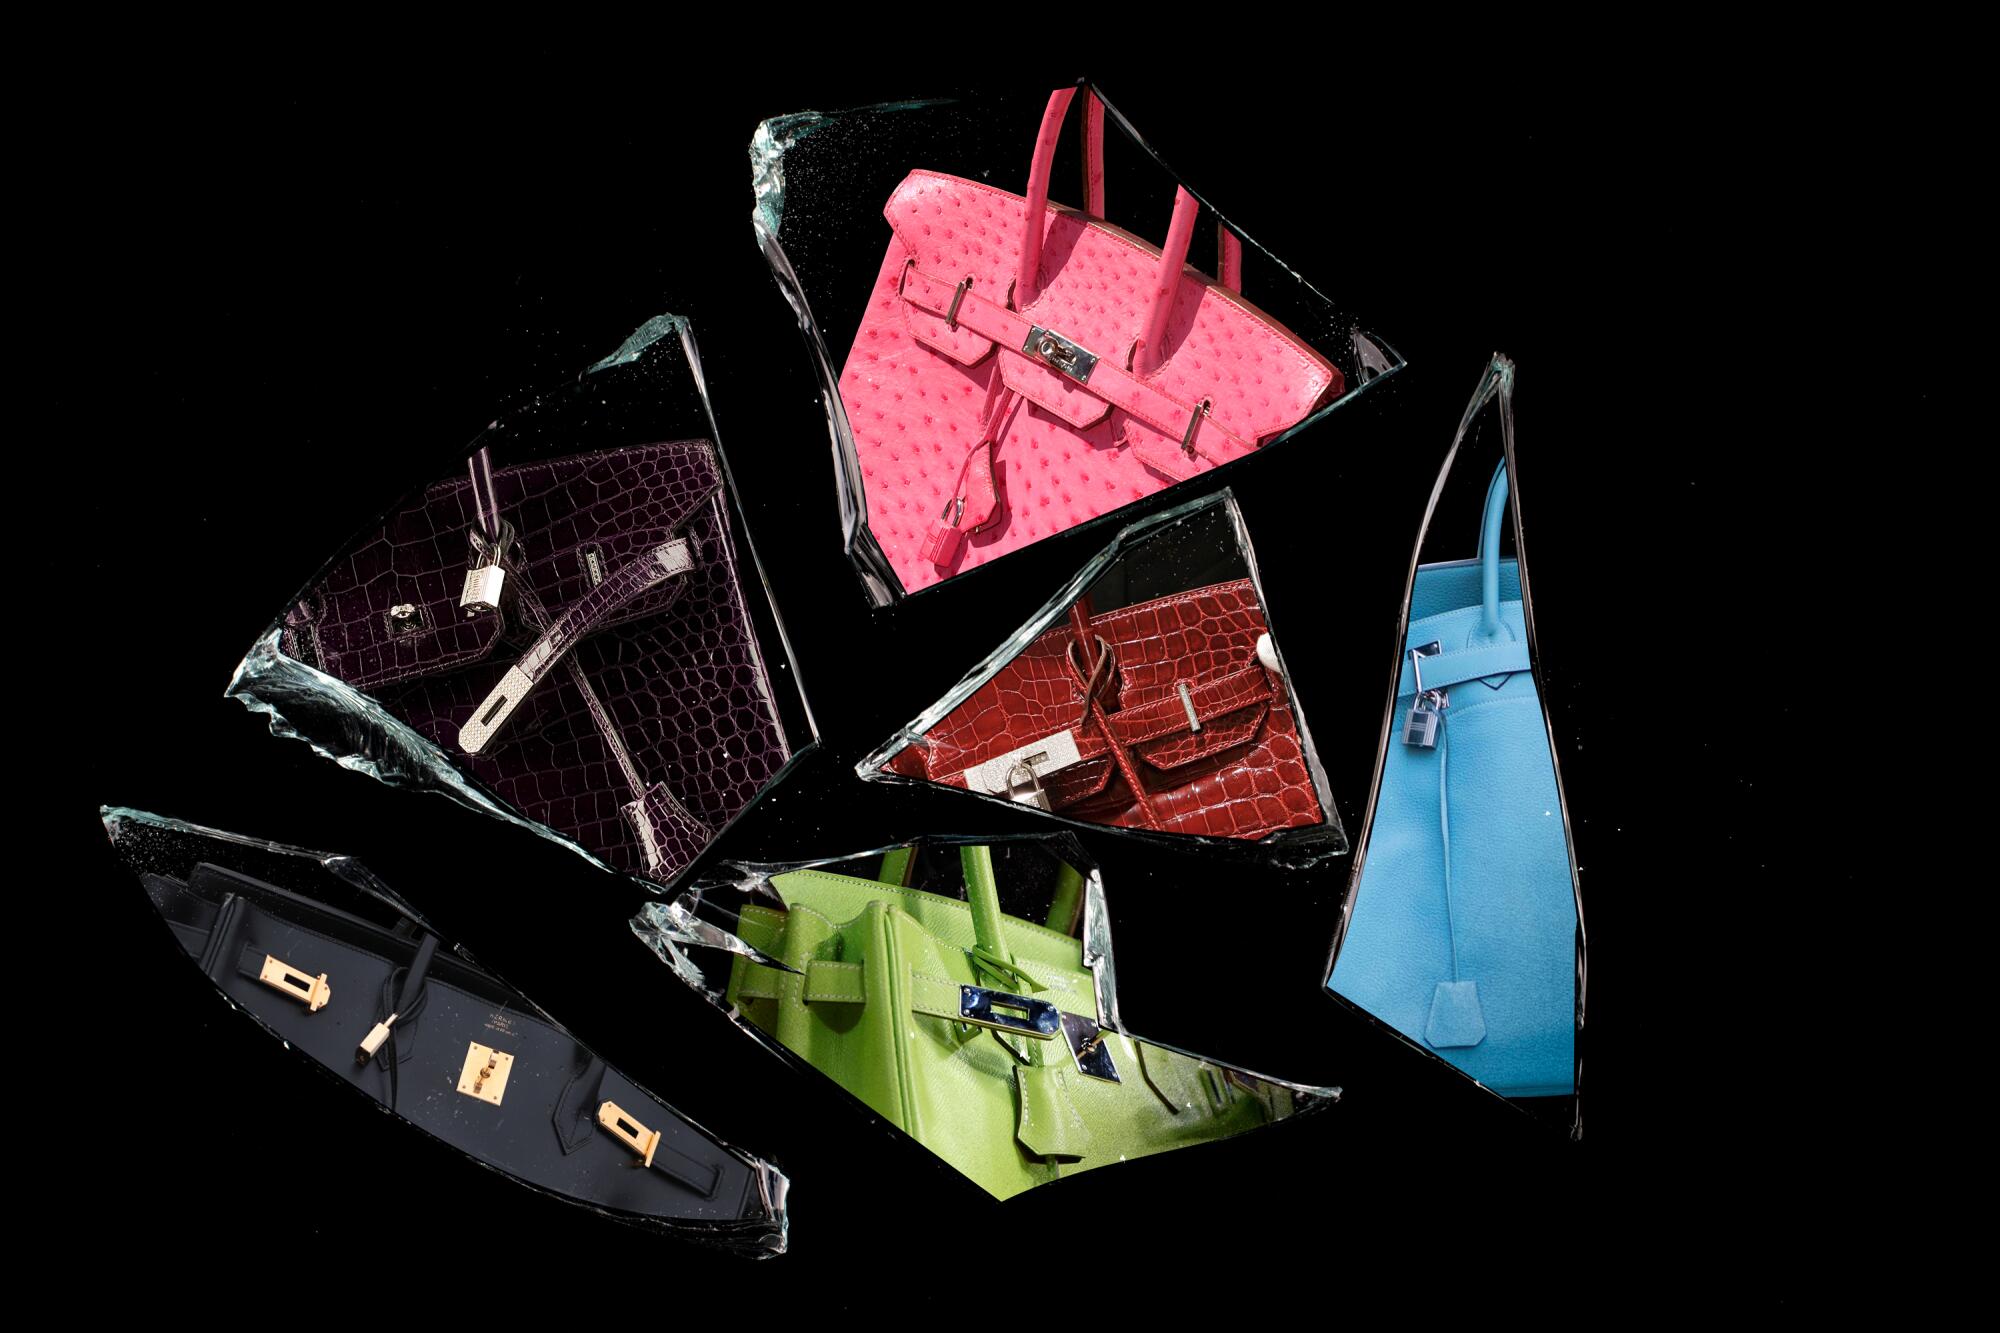 A photo illustration of shards of glass, each superimposed with a different color of Birkin handbag, on a black background